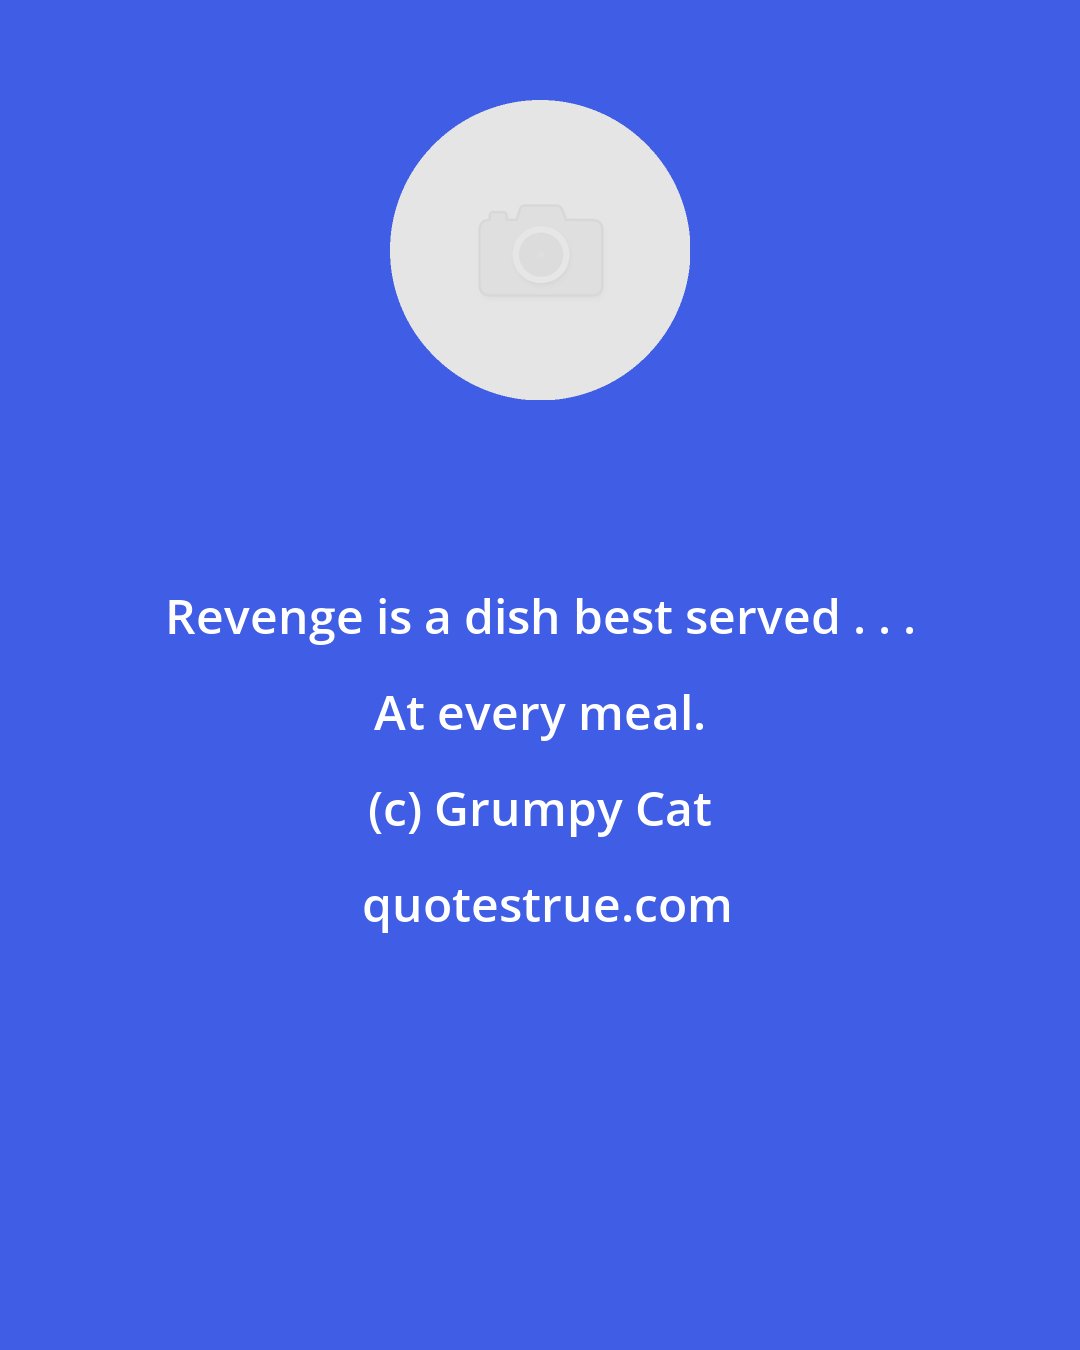 Grumpy Cat: Revenge is a dish best served . . . At every meal.